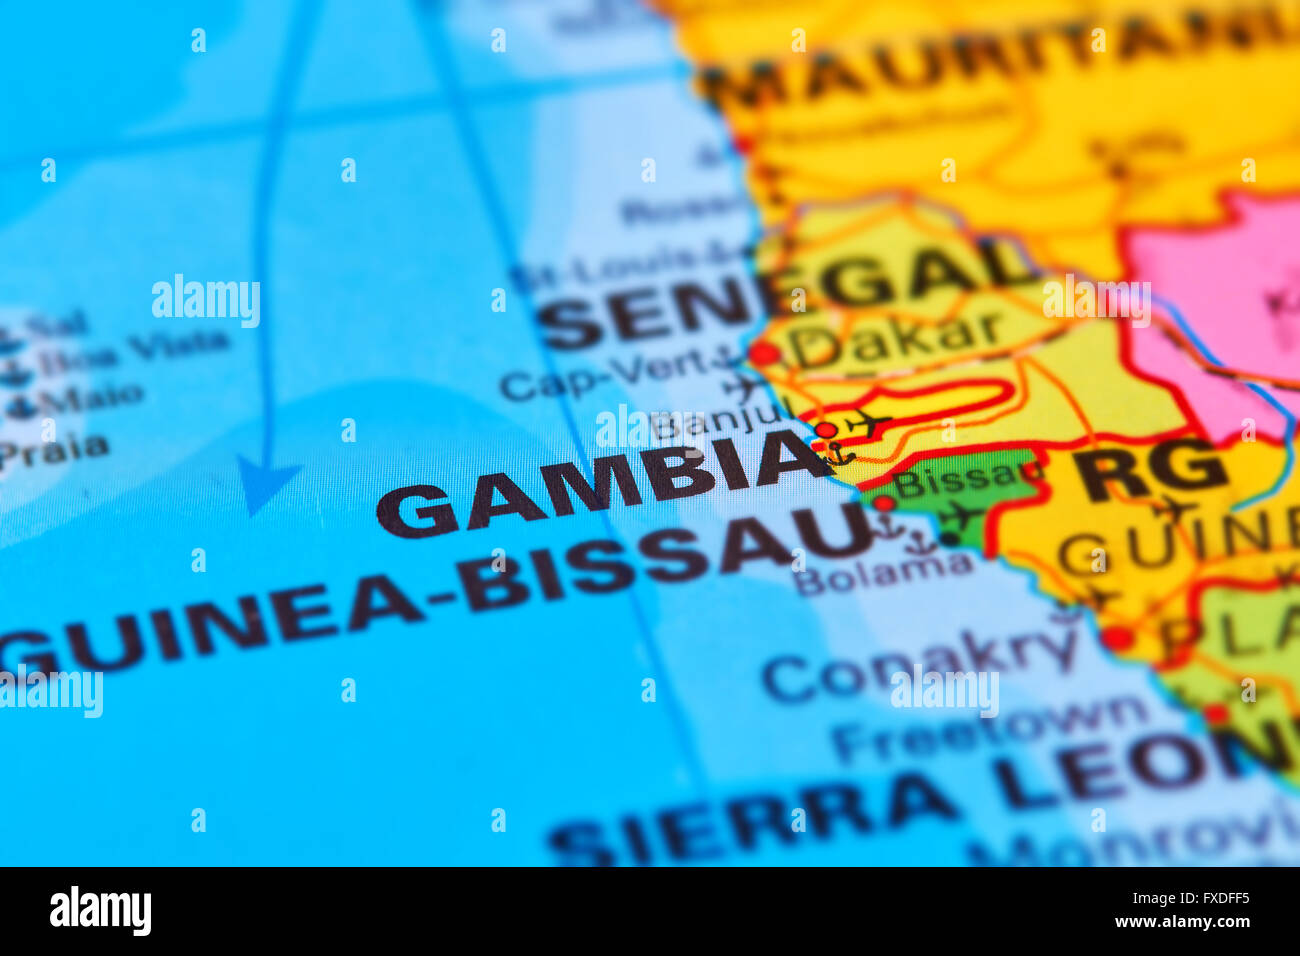 Gambia Country in Africa on the World Map Stock Photo